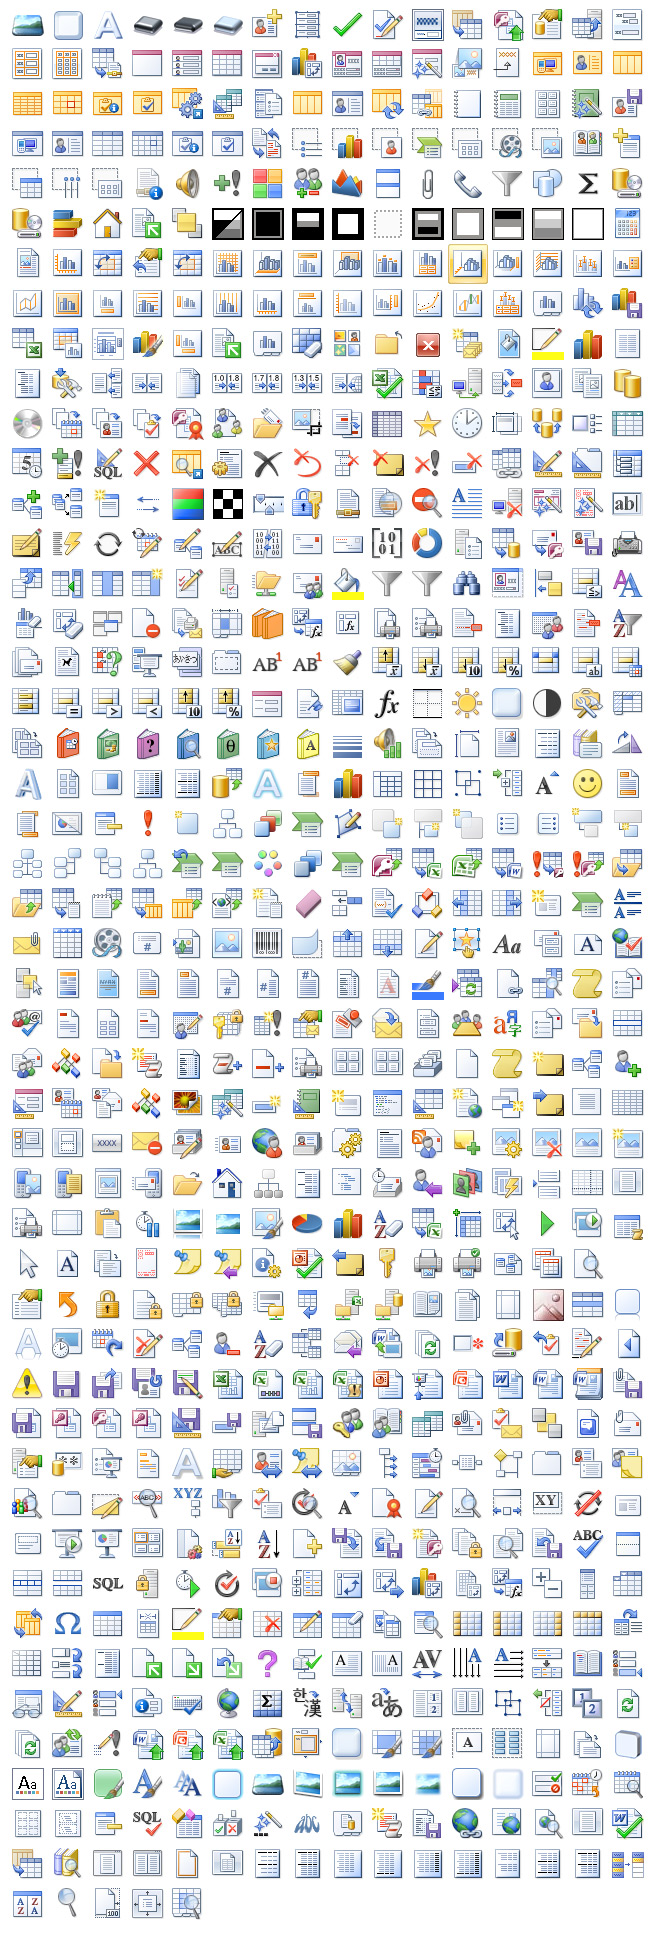 Microsoft Office 2007 Icons Missing